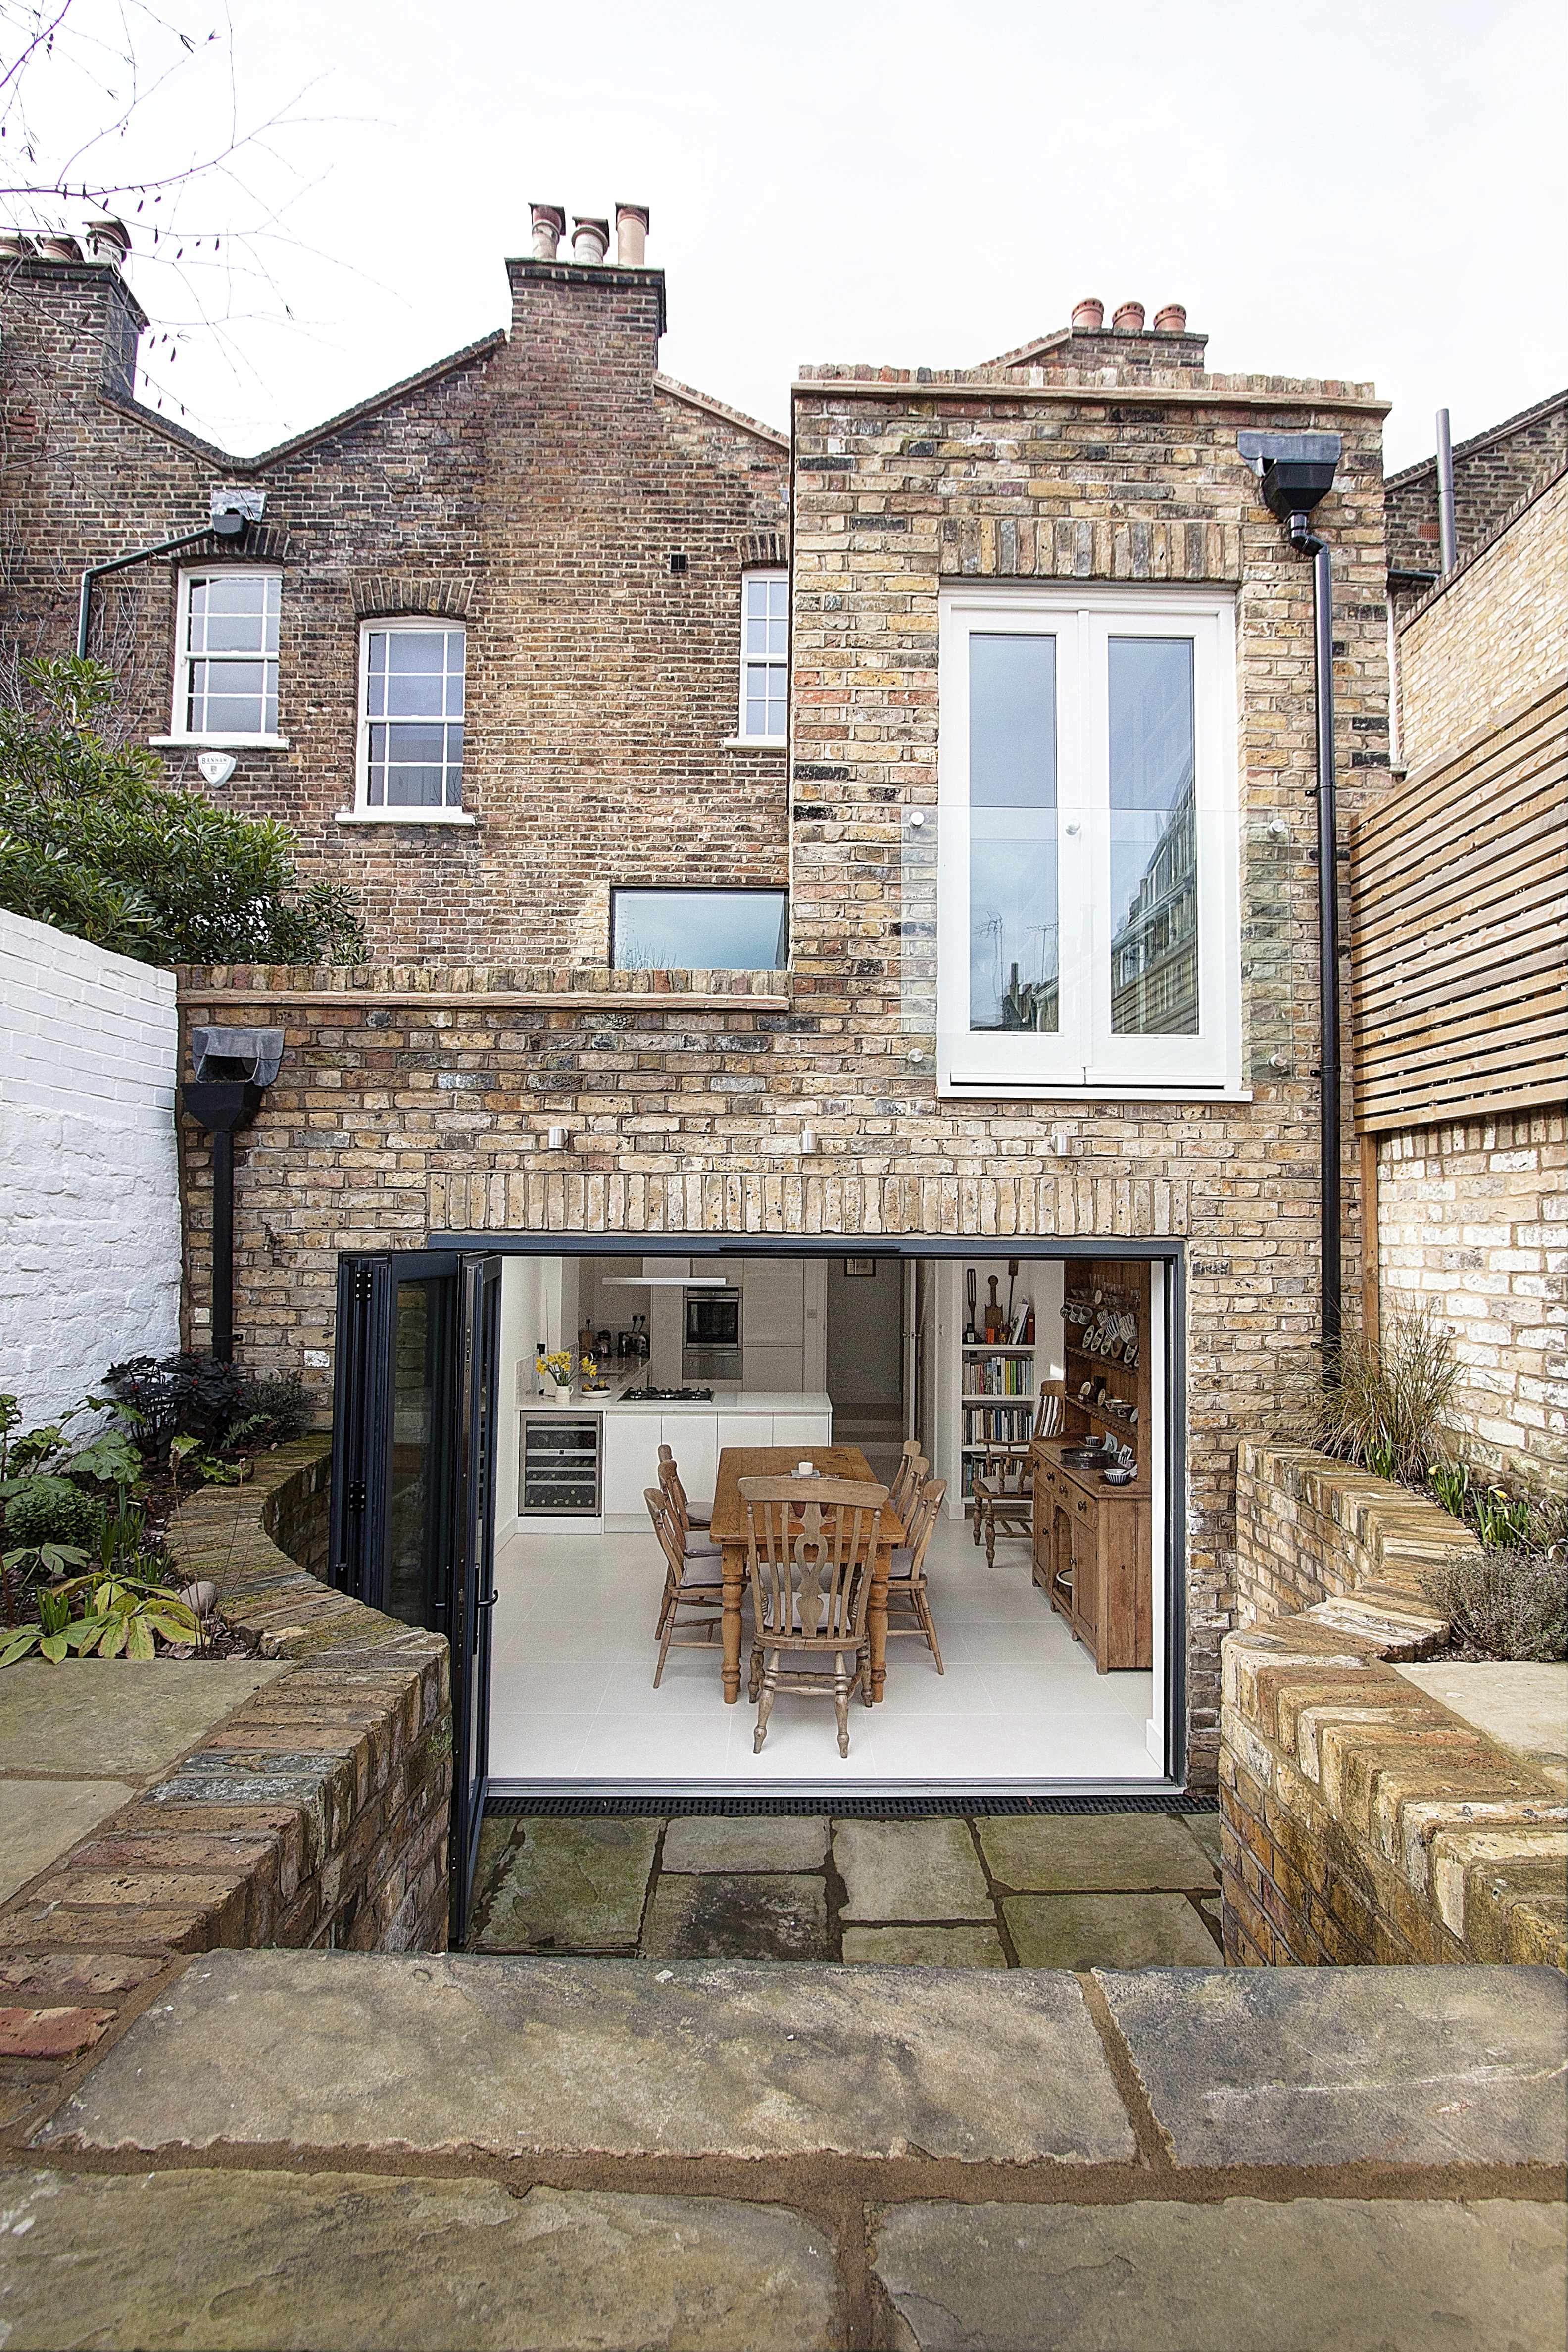 </p> <p>Find your ideal home design pro on designfor-me.com - get matched and see who's interested in your home project. Click image to see more inspiration from our design pros</p> <p>Design by Matt, architectural designer from Hammersmith</p> <p>#architecture #homedesign #modernhomes #homeinspiration #extensions #extensiondesign #extensioninspiration #extensionideas #houseextension #glazing #architecturalglazing #naturallight #bifolddoors #bifolds </p> <p>